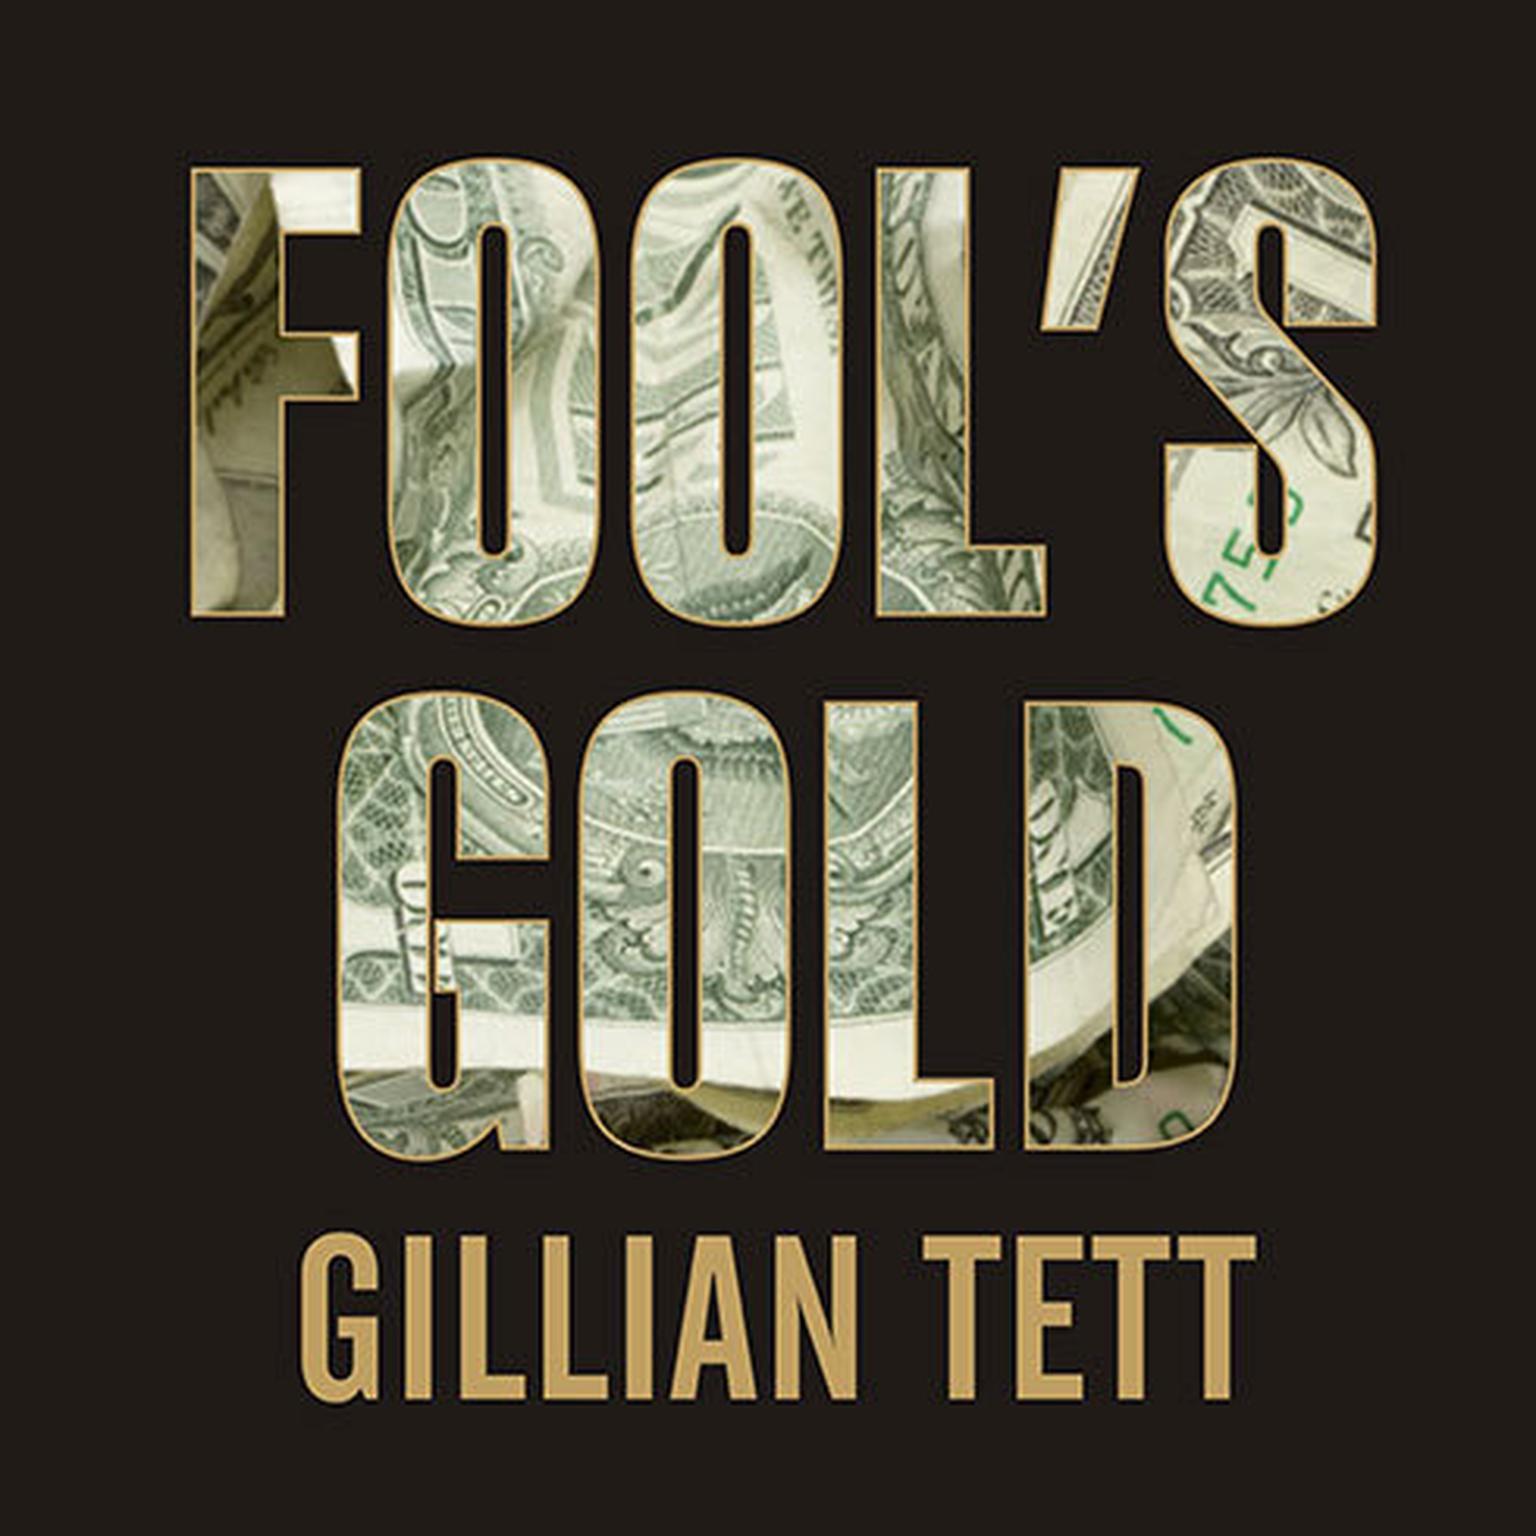 Fools Gold: How the Bold Dream of a Small Tribe at J.P. Morgan Was Corrupted by Wall Street Greed and Unleashed a Catastrophe Audiobook, by Gillian Tett